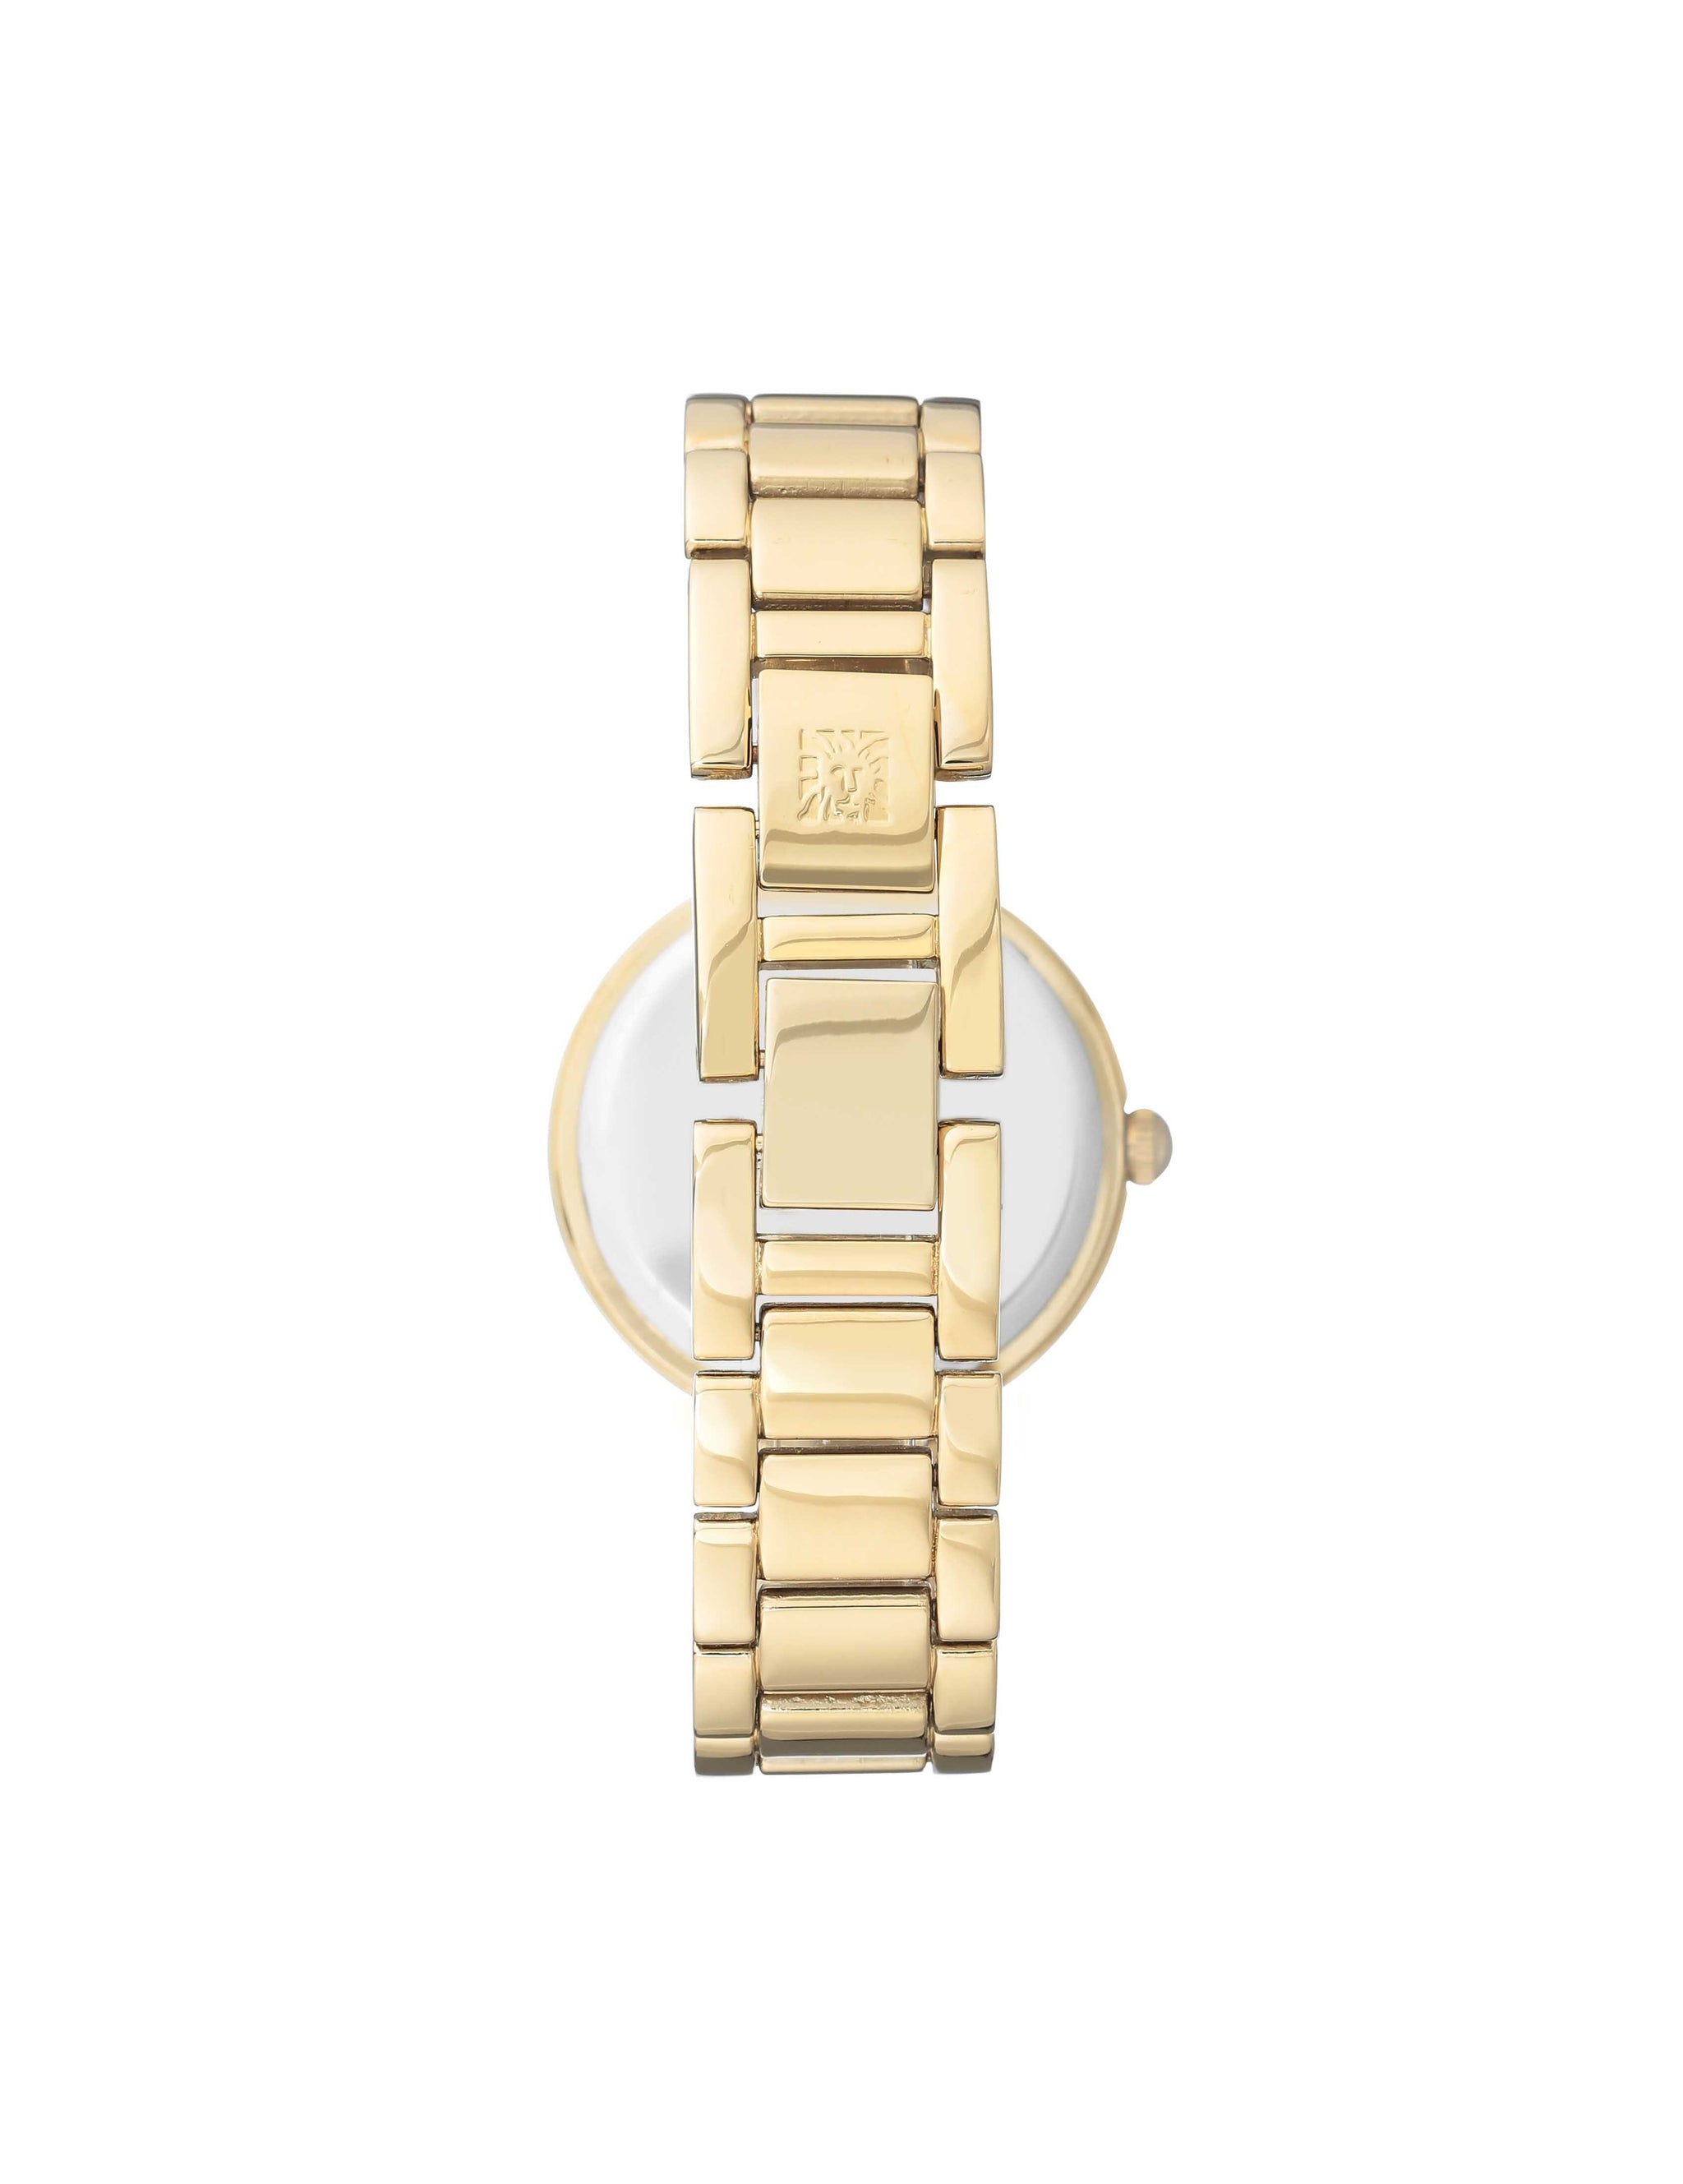 GUESS Mens Gold Tone Chronograph Watch - U0668G4 | GUESS Watches US